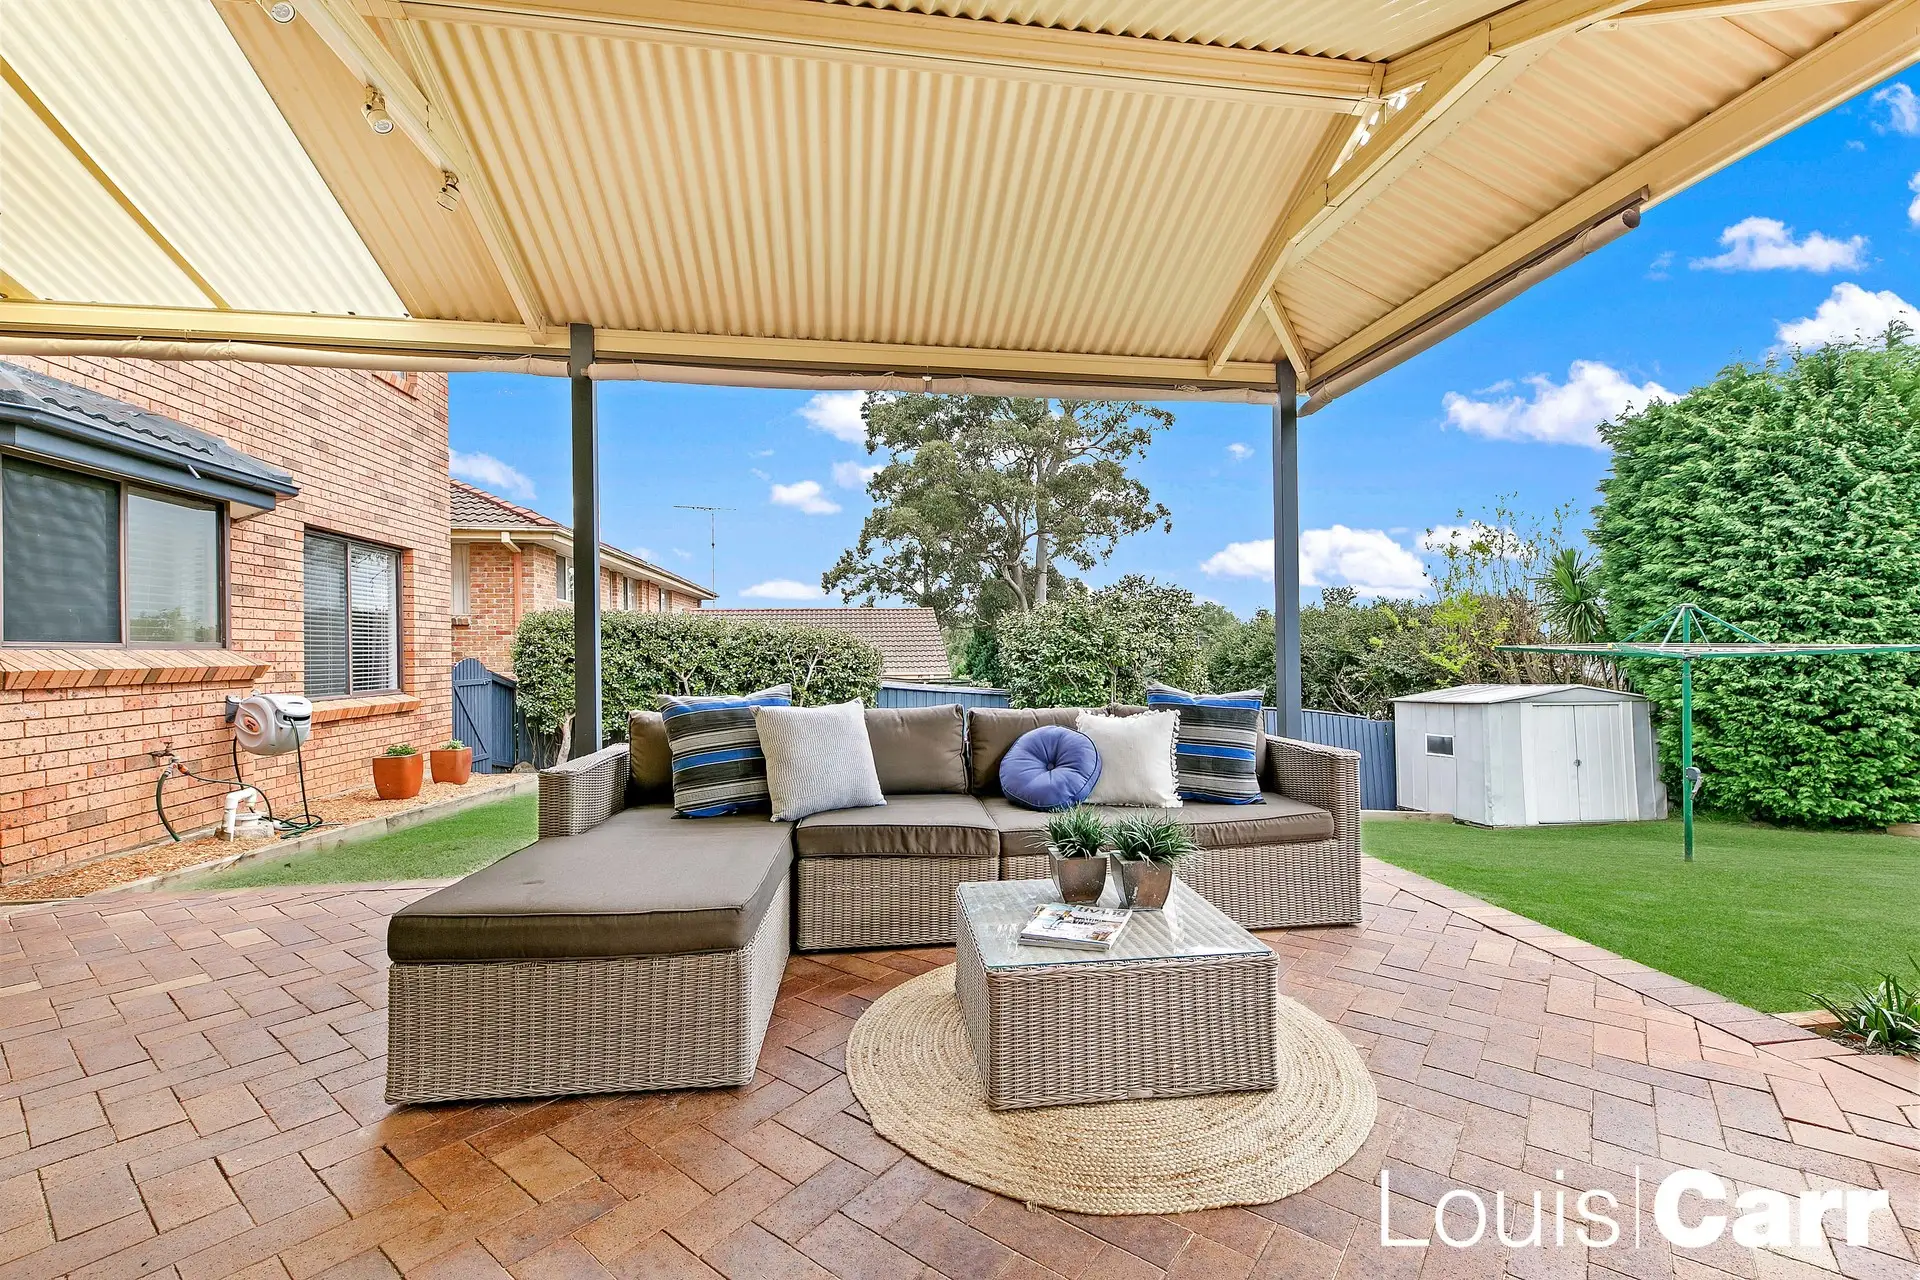 Photo #15: 82 Gooraway Drive, Castle Hill - Sold by Louis Carr Real Estate